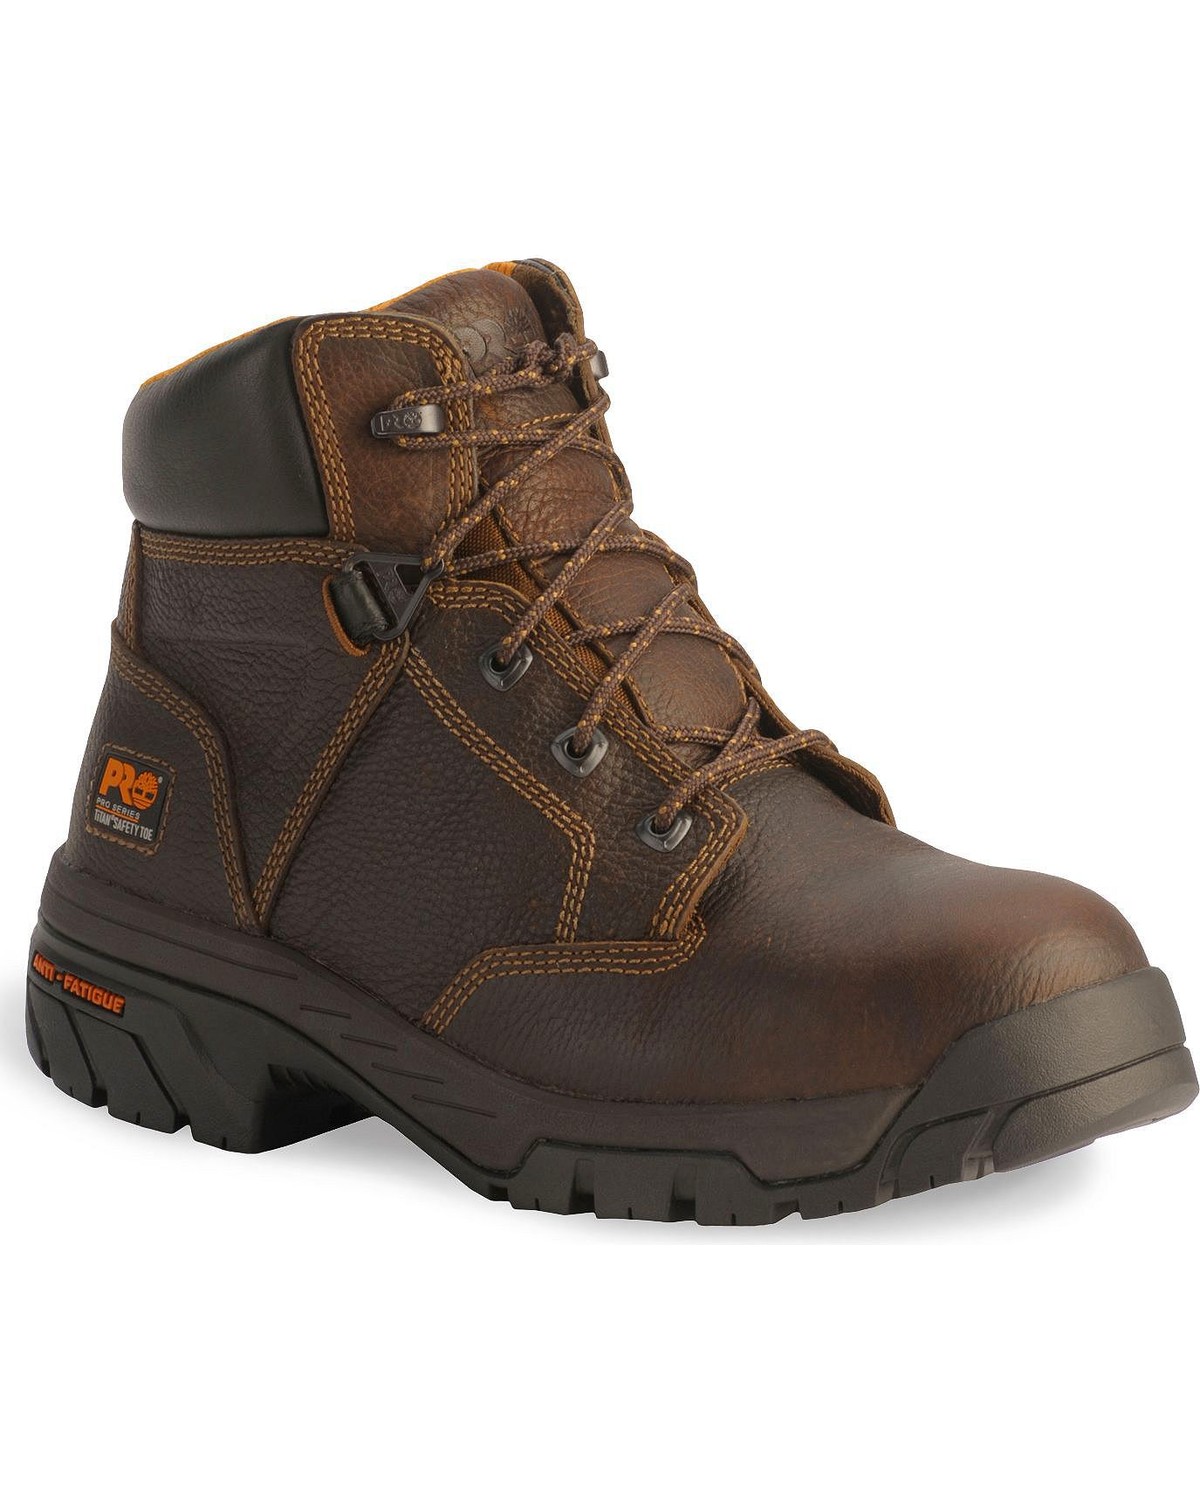 Timberland Pro Brown 6" Helix Boots - Composite Toe